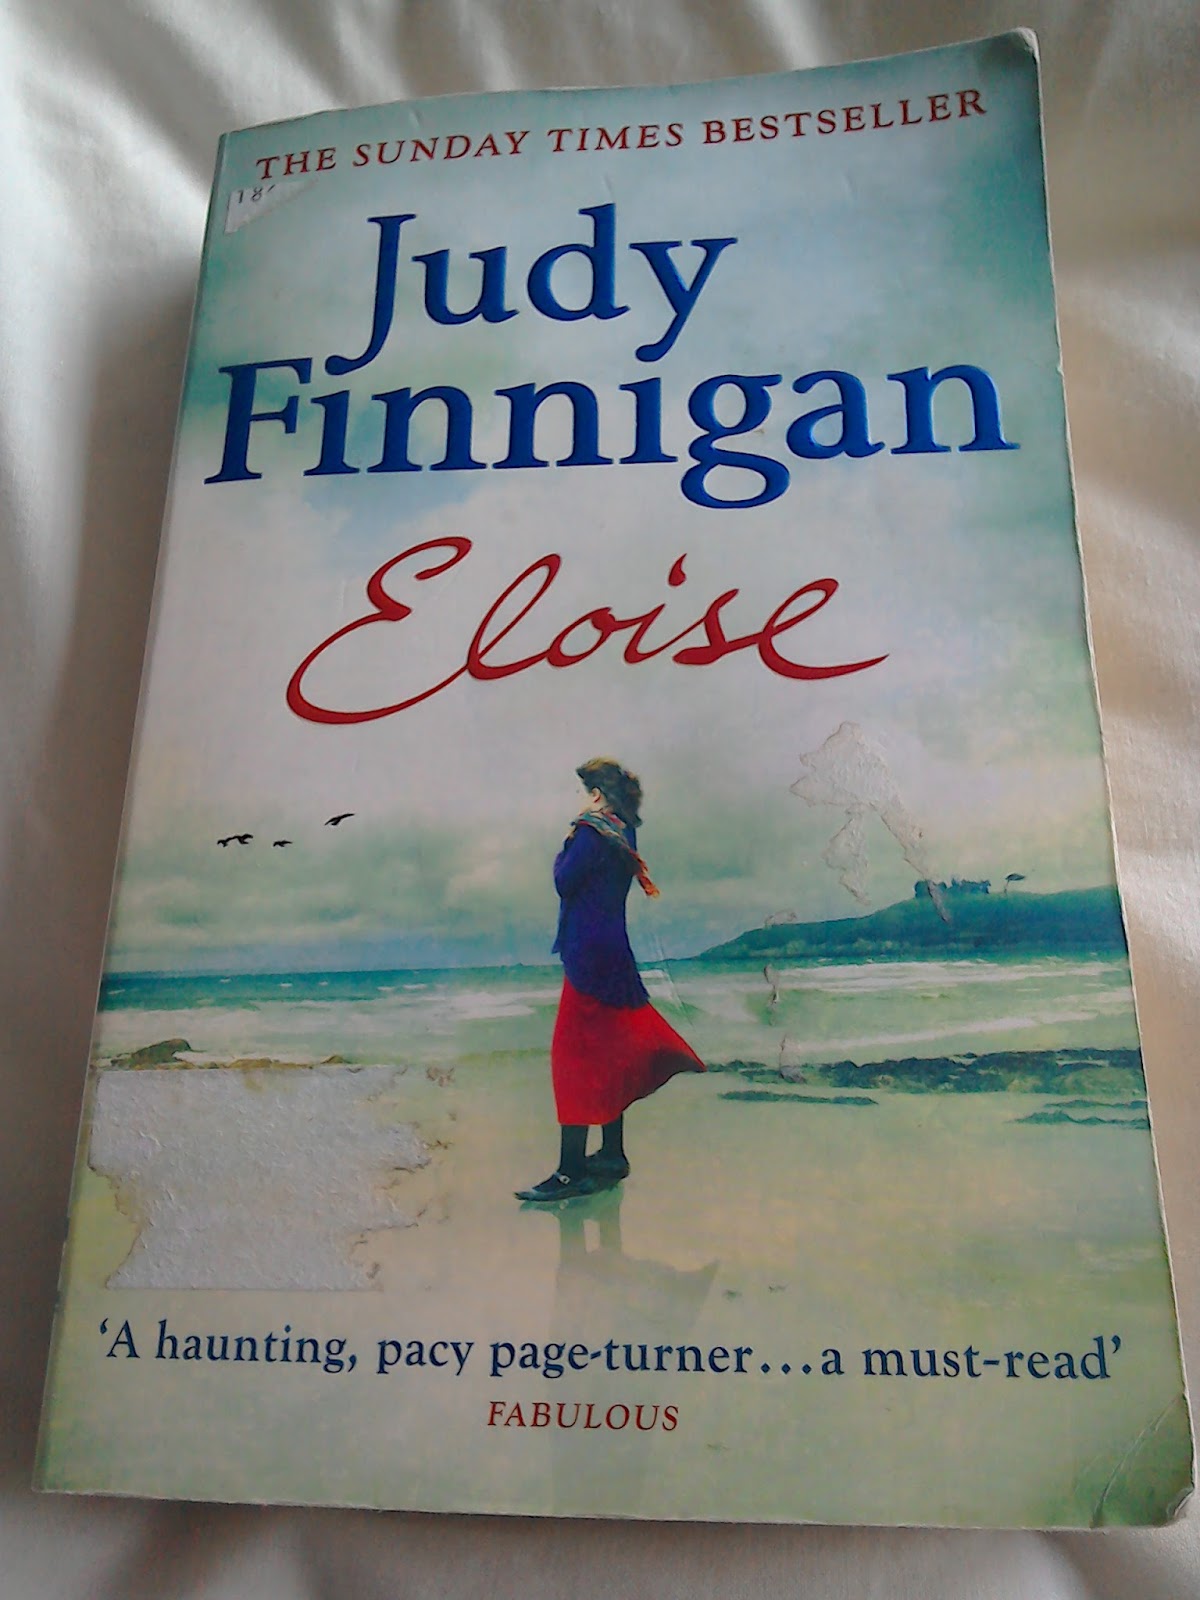 SIMPLY IN STITCHES: Eloise by Judy Finnigan book review